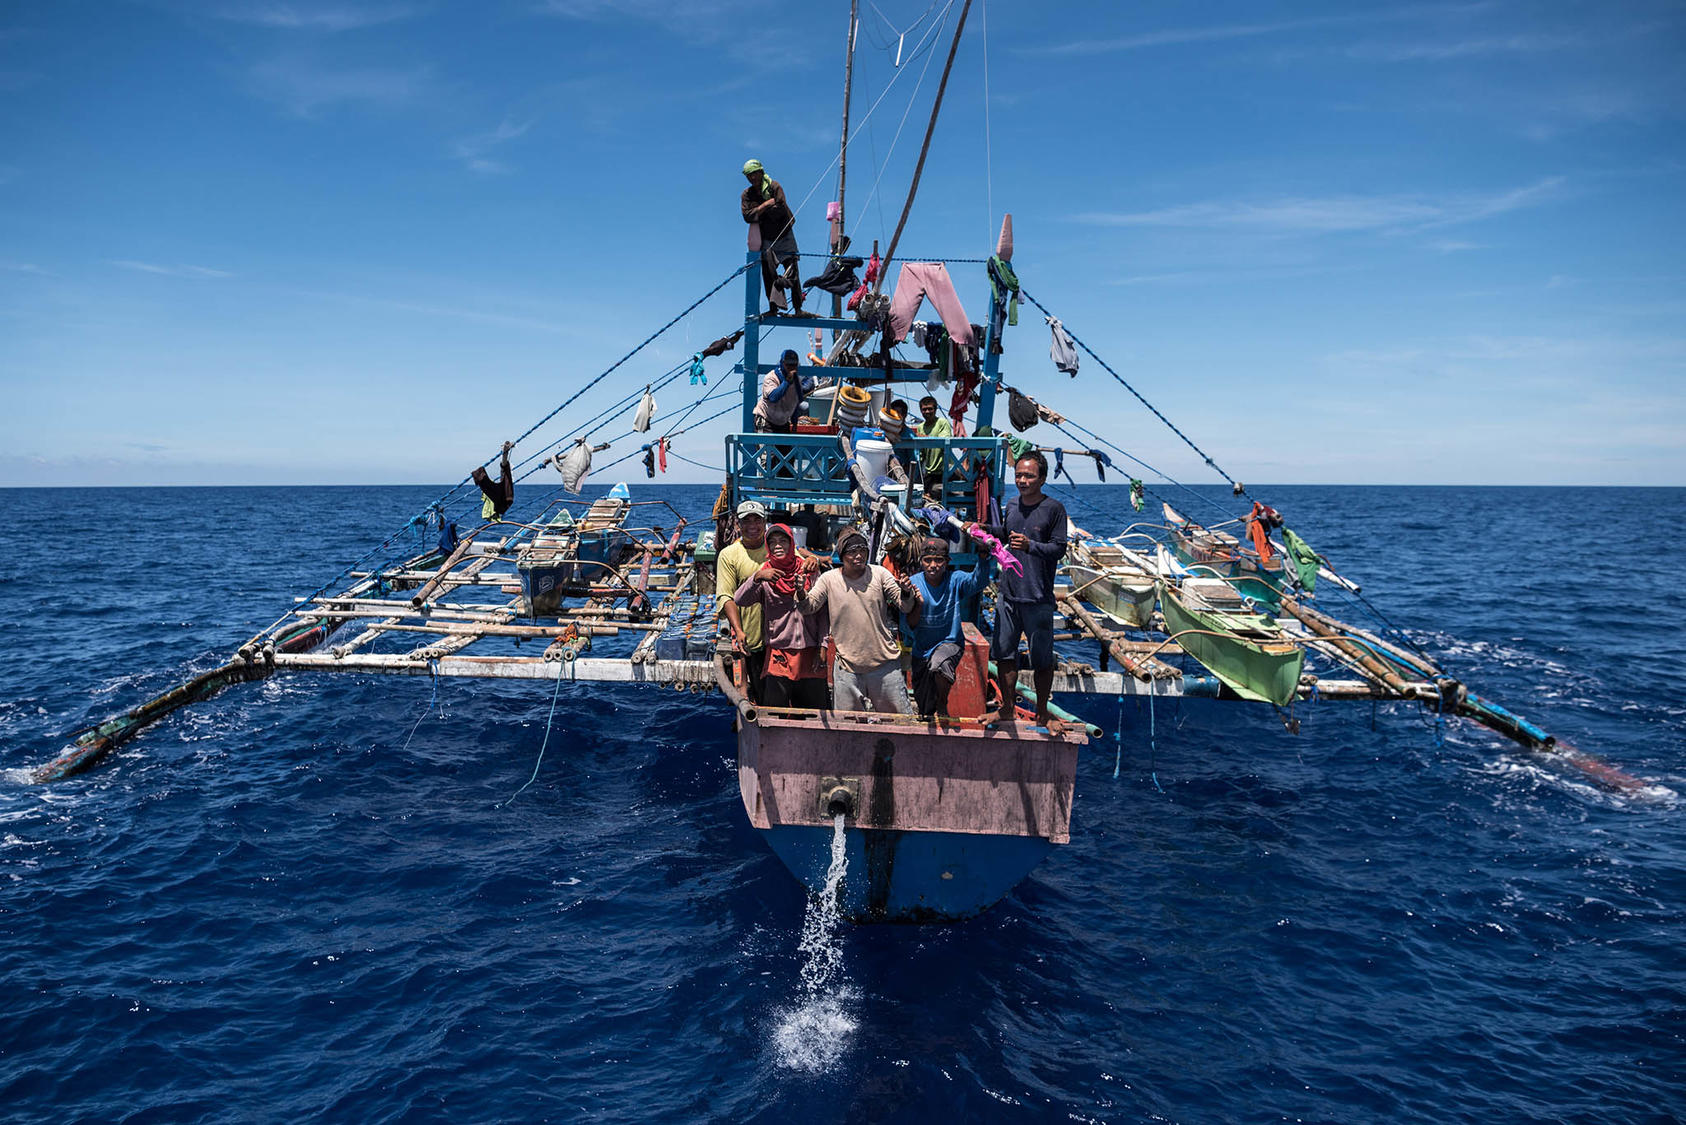 Filipino fisherman aboard a boat near Scarborough Shoal, a disputed reef in the South China Sea that China seized from the Philippines in 2012, off the coast of the Philippines, June 18, 2016. (Sergey Ponomarev/The New York Times)